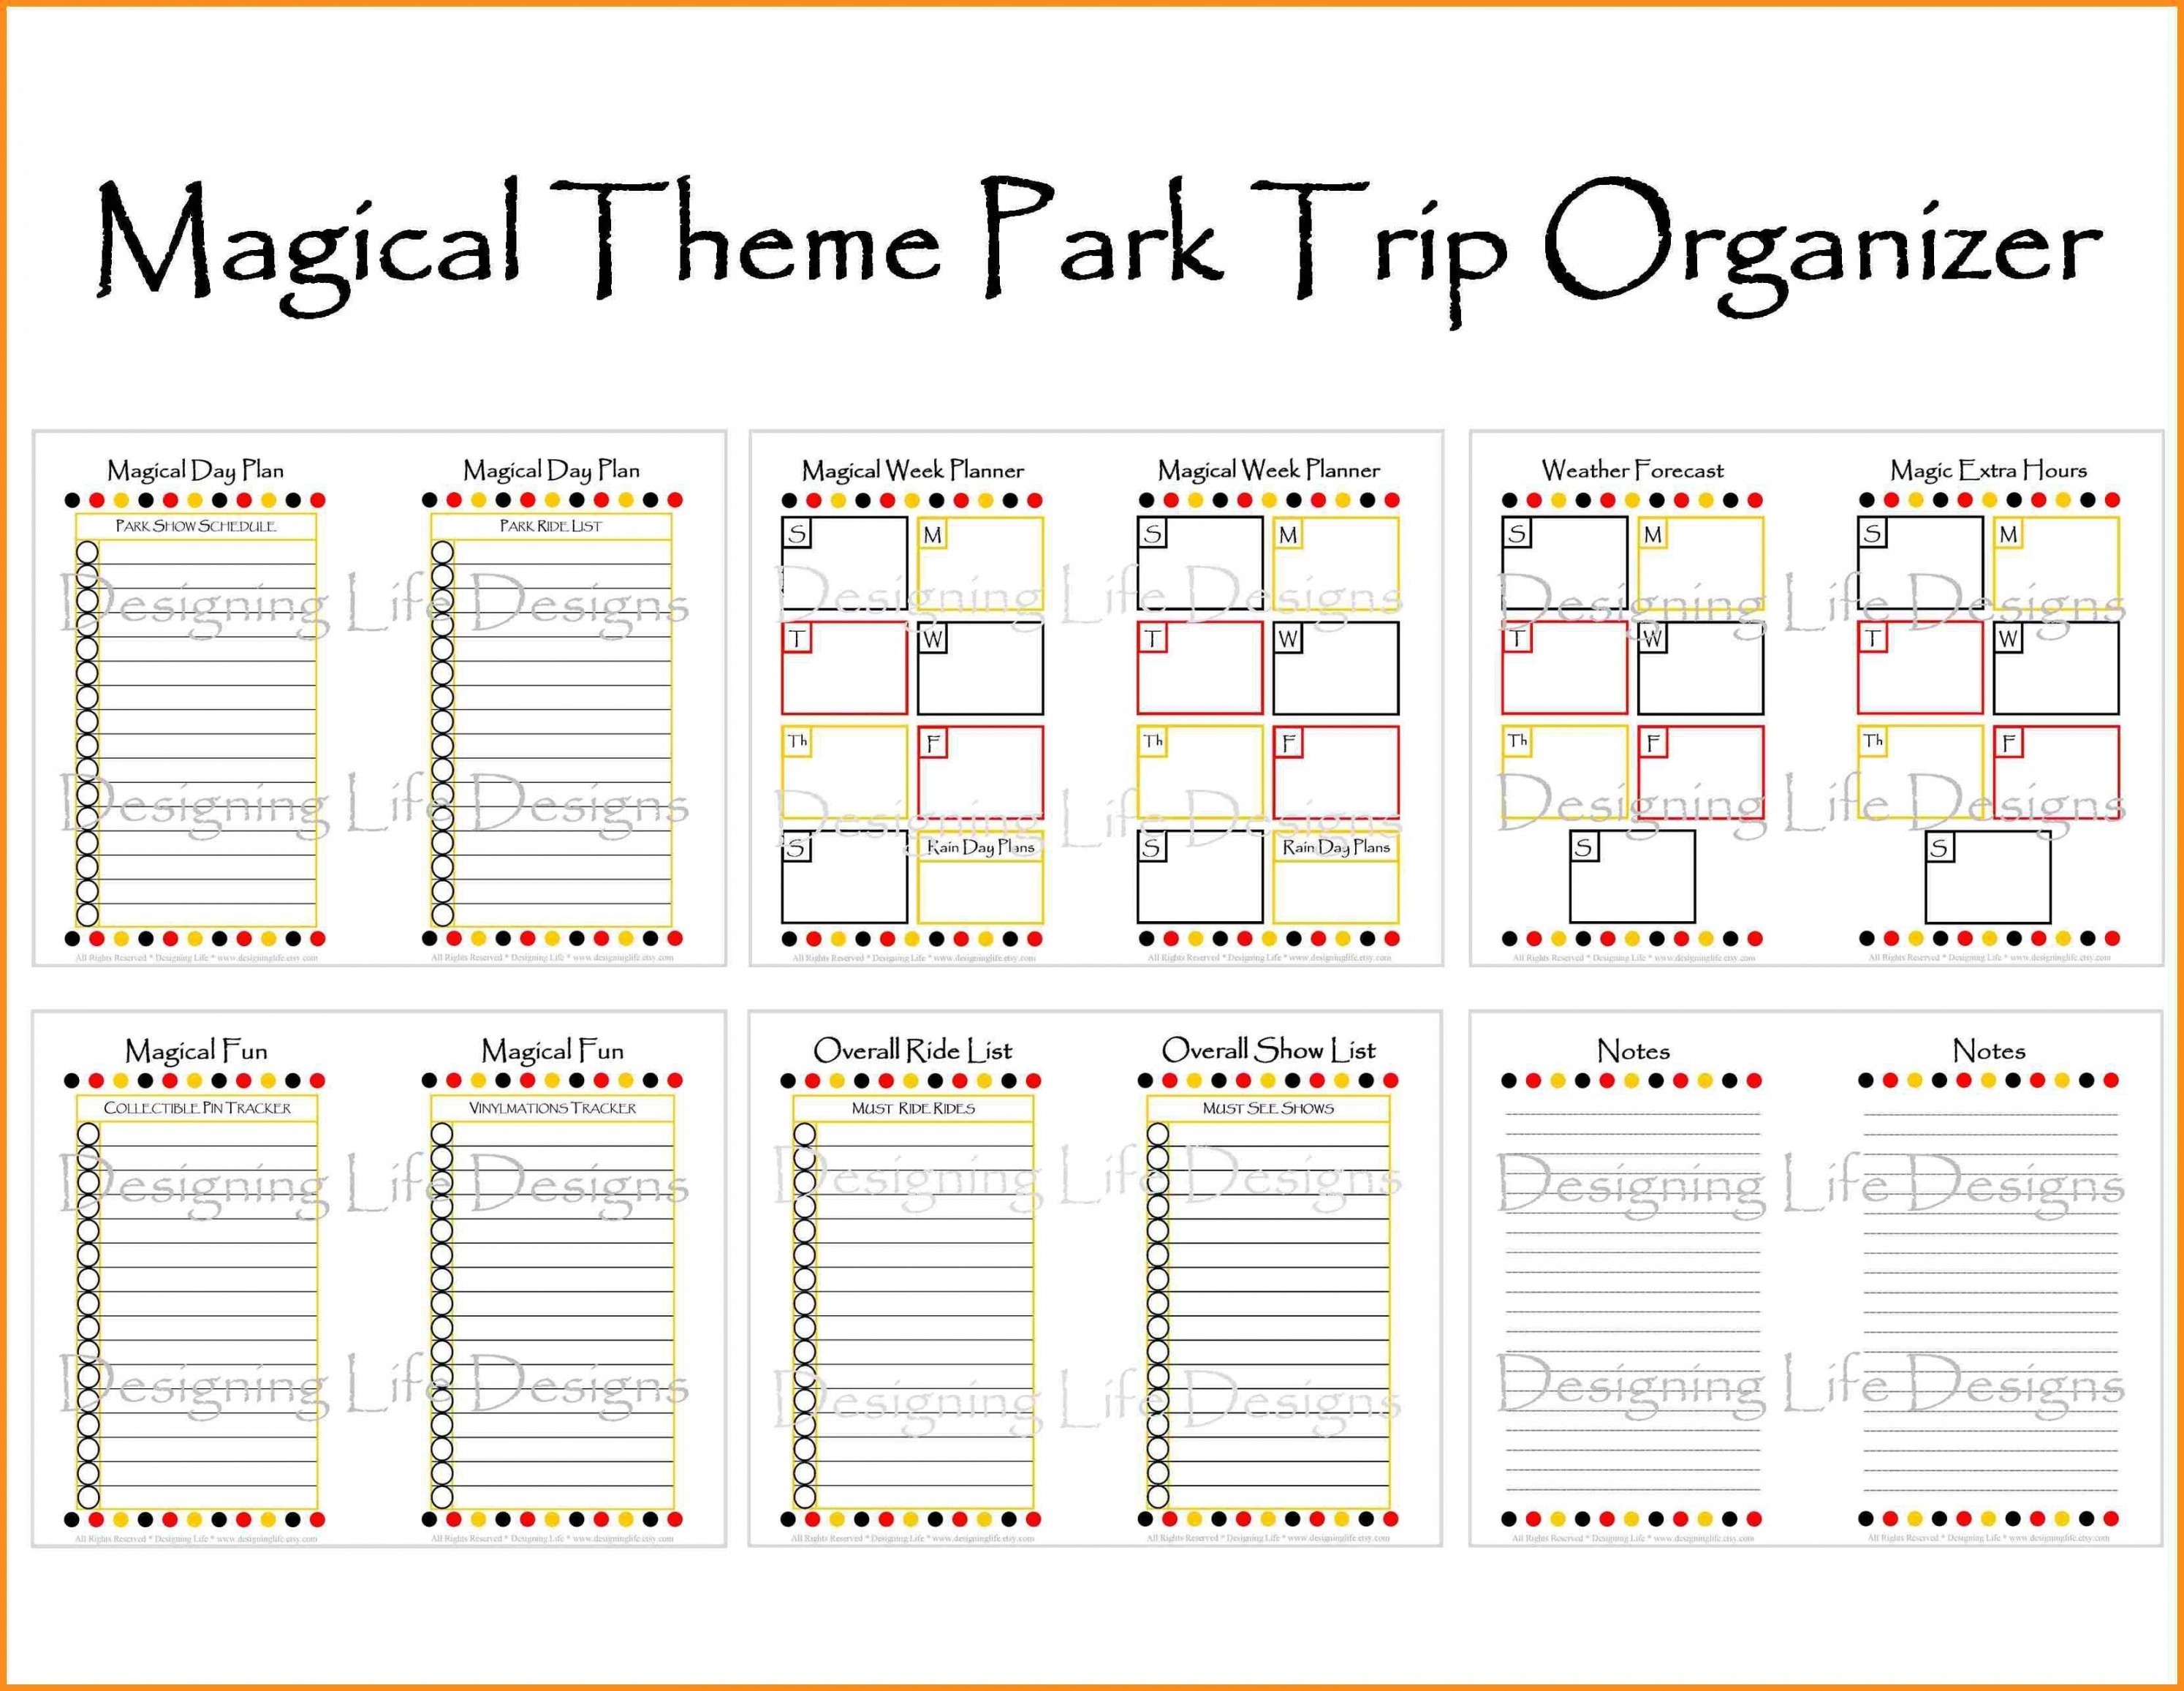 Image Result For Disney World Itinerary Template Disney Fun-Free Printable Disneyland Itinerary Template